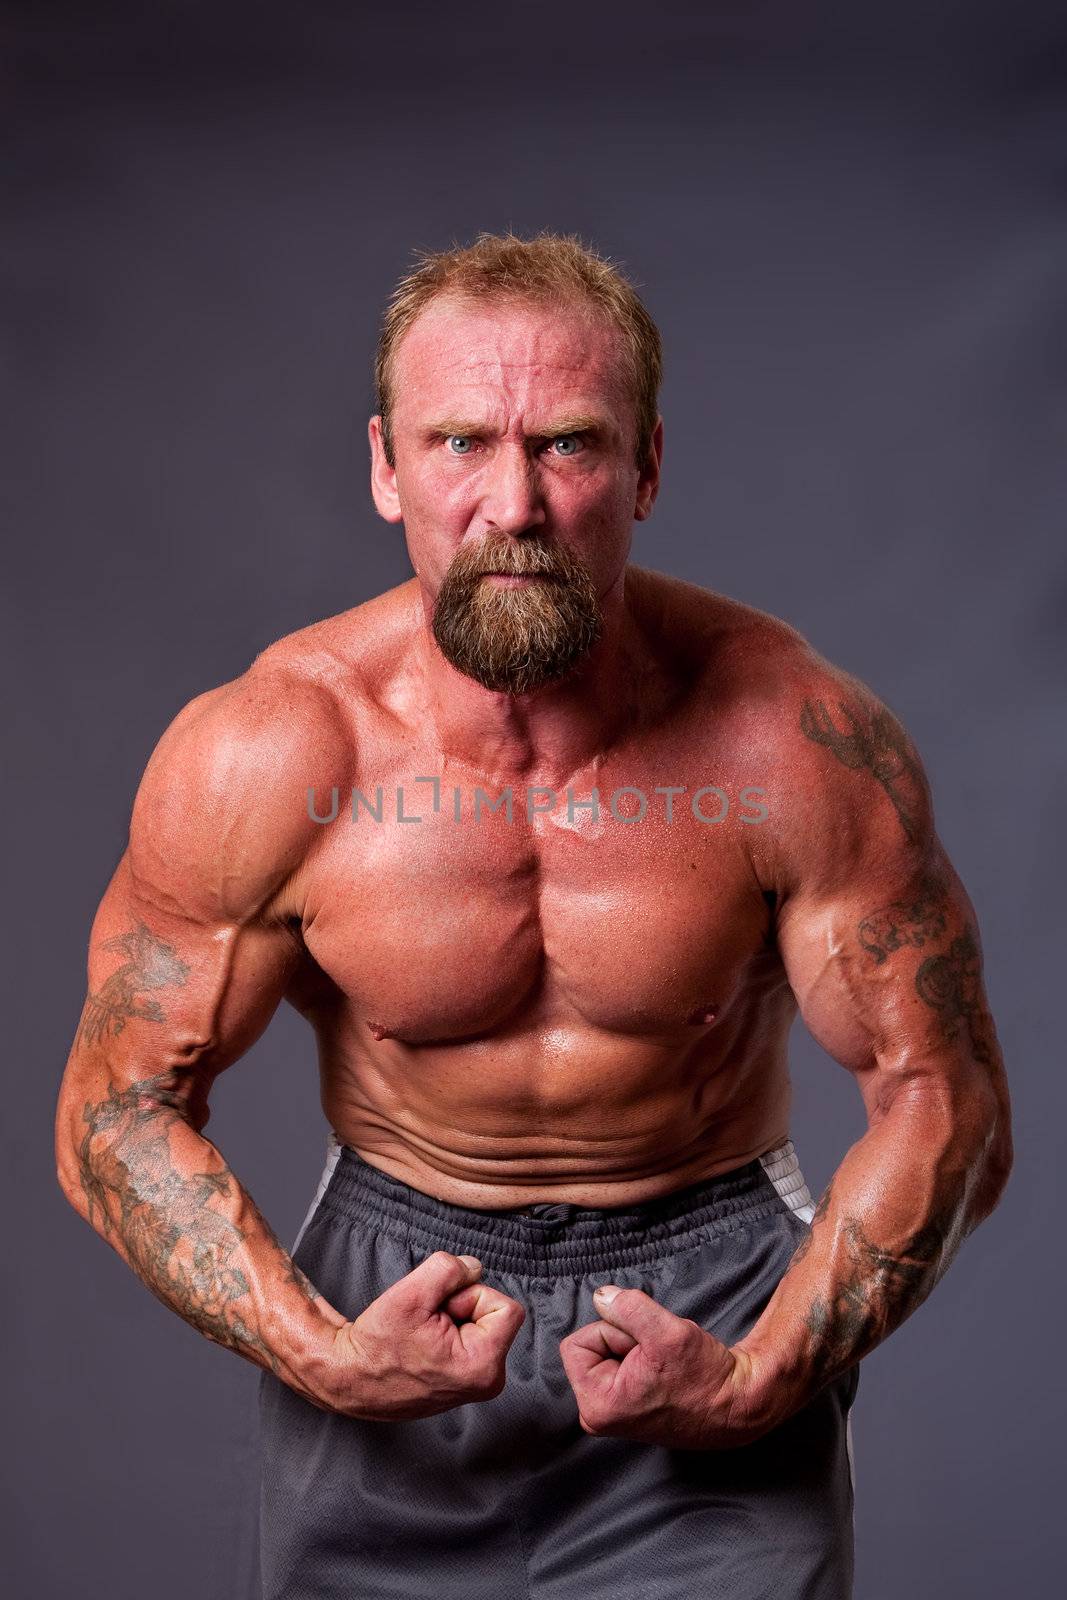 Middle aged man body builder by phakimata